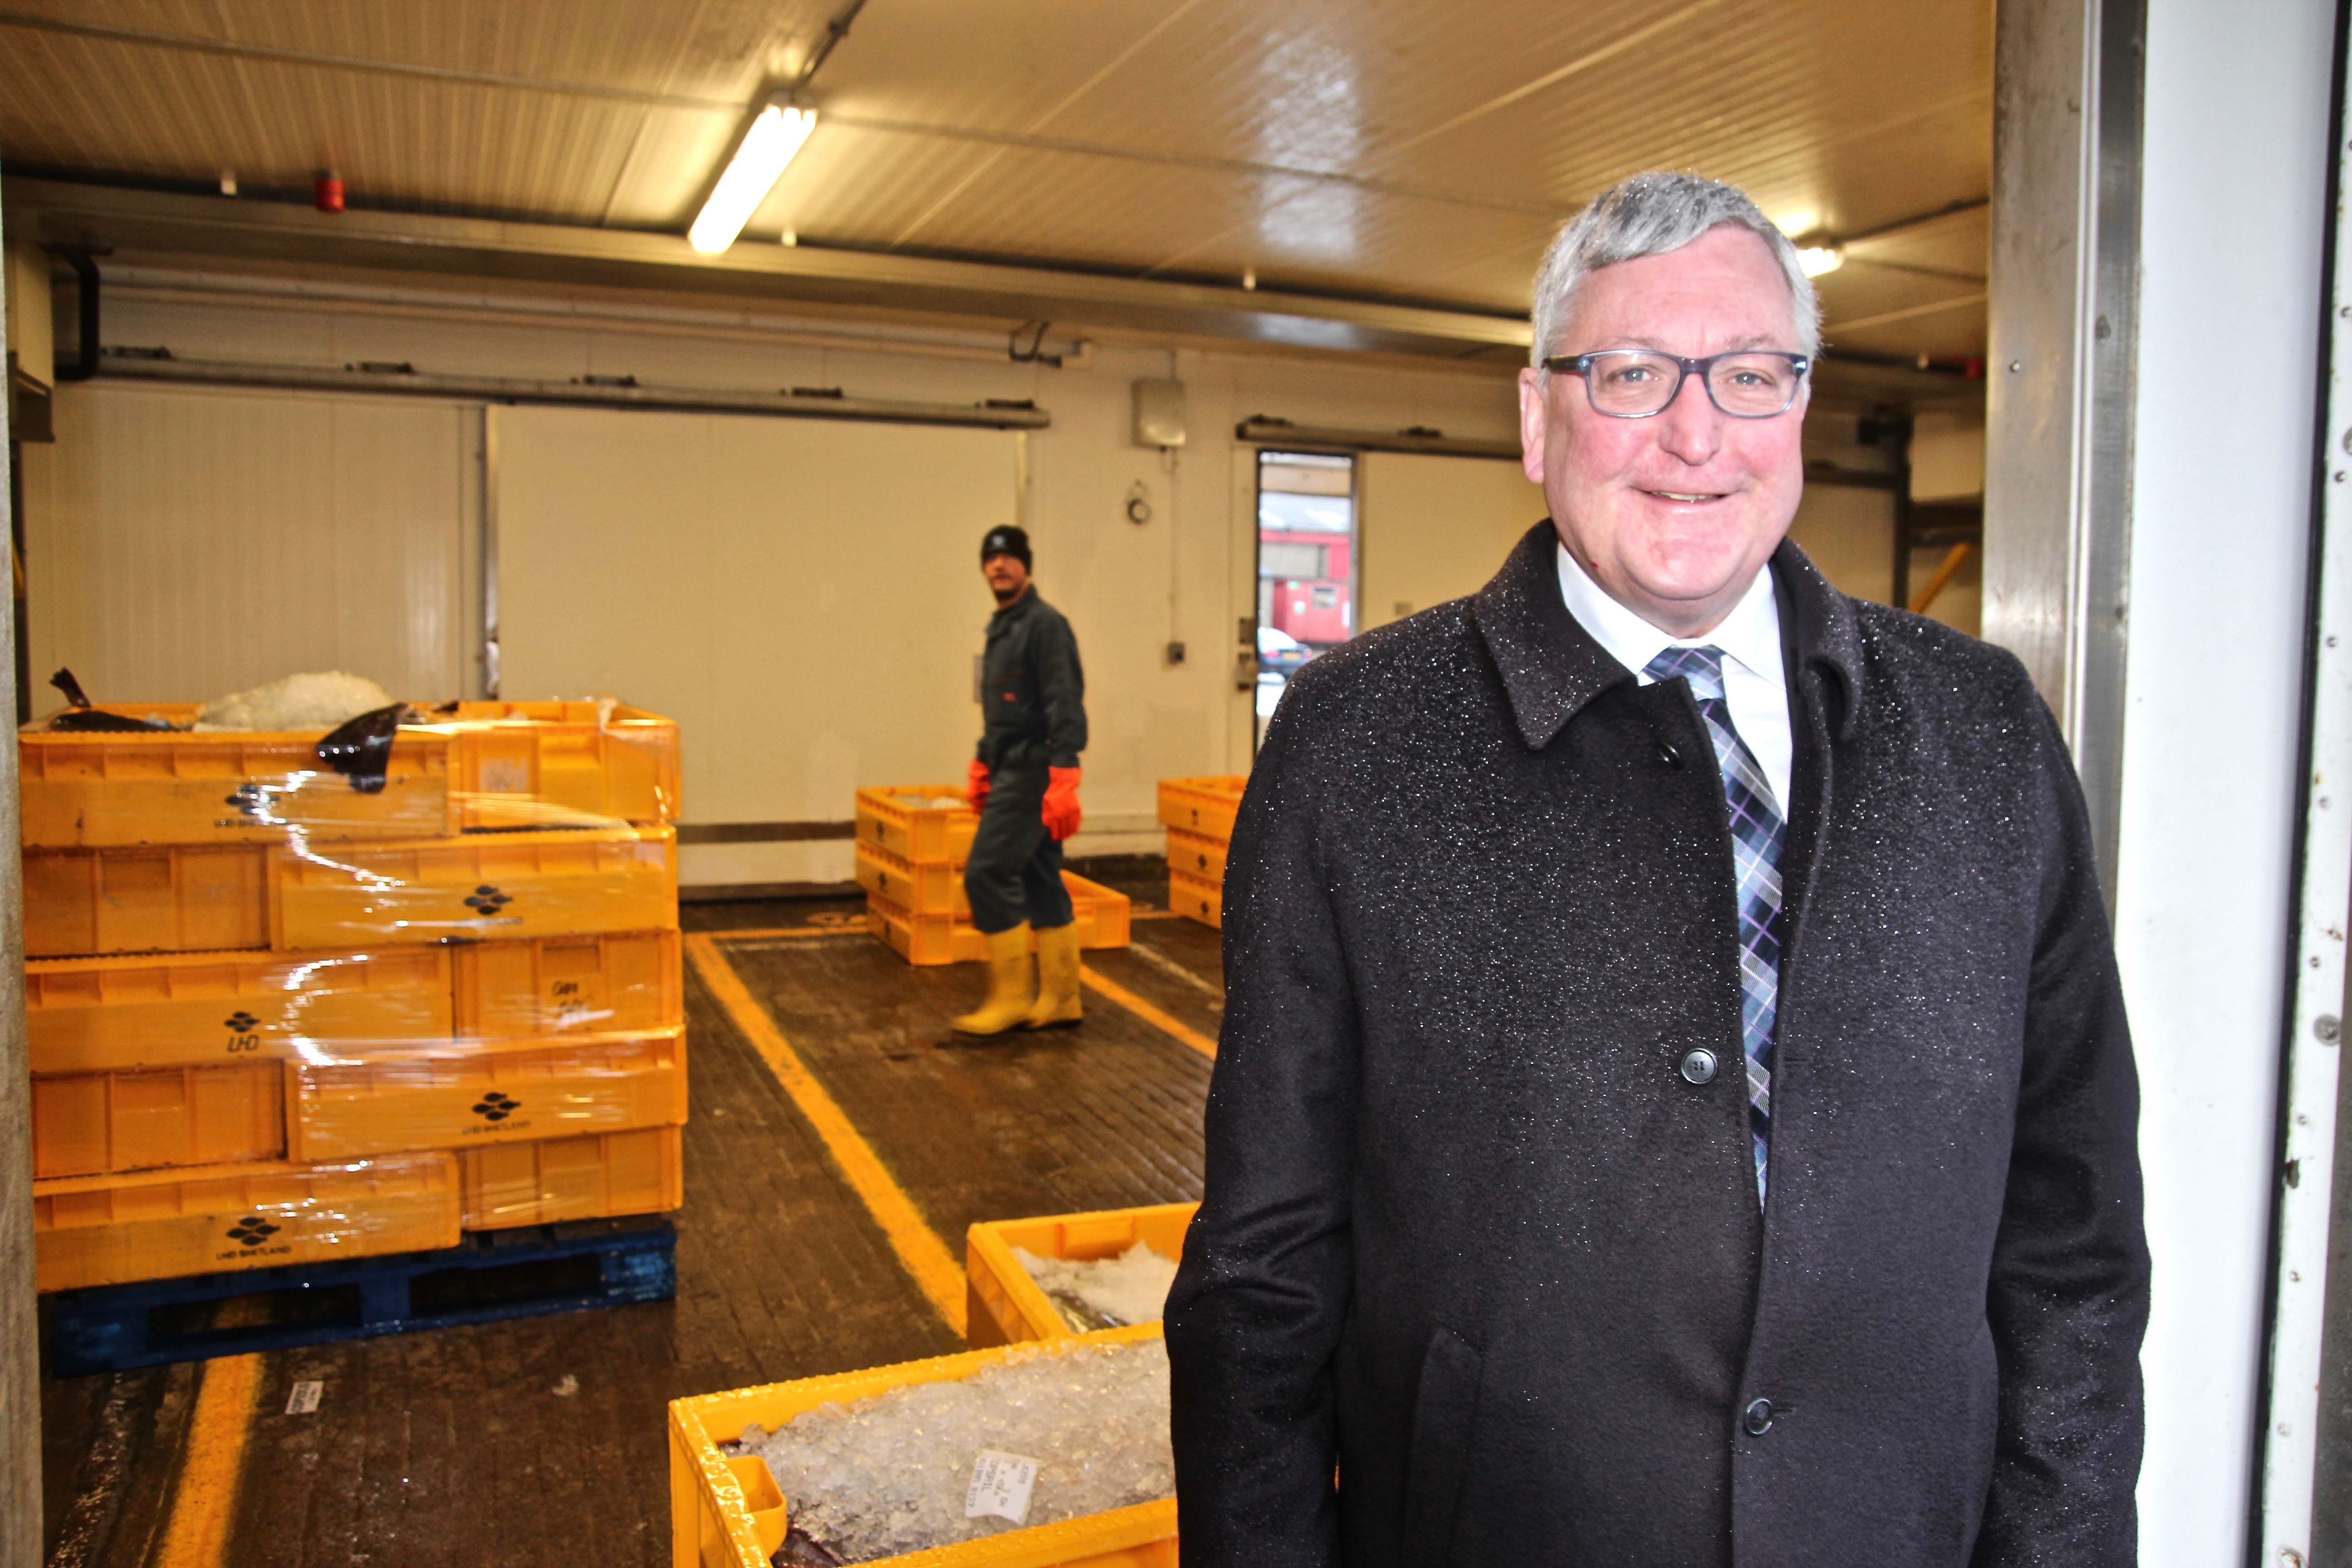 WATCH: Fisheries minister warning over Brexit - Shetland Times Online